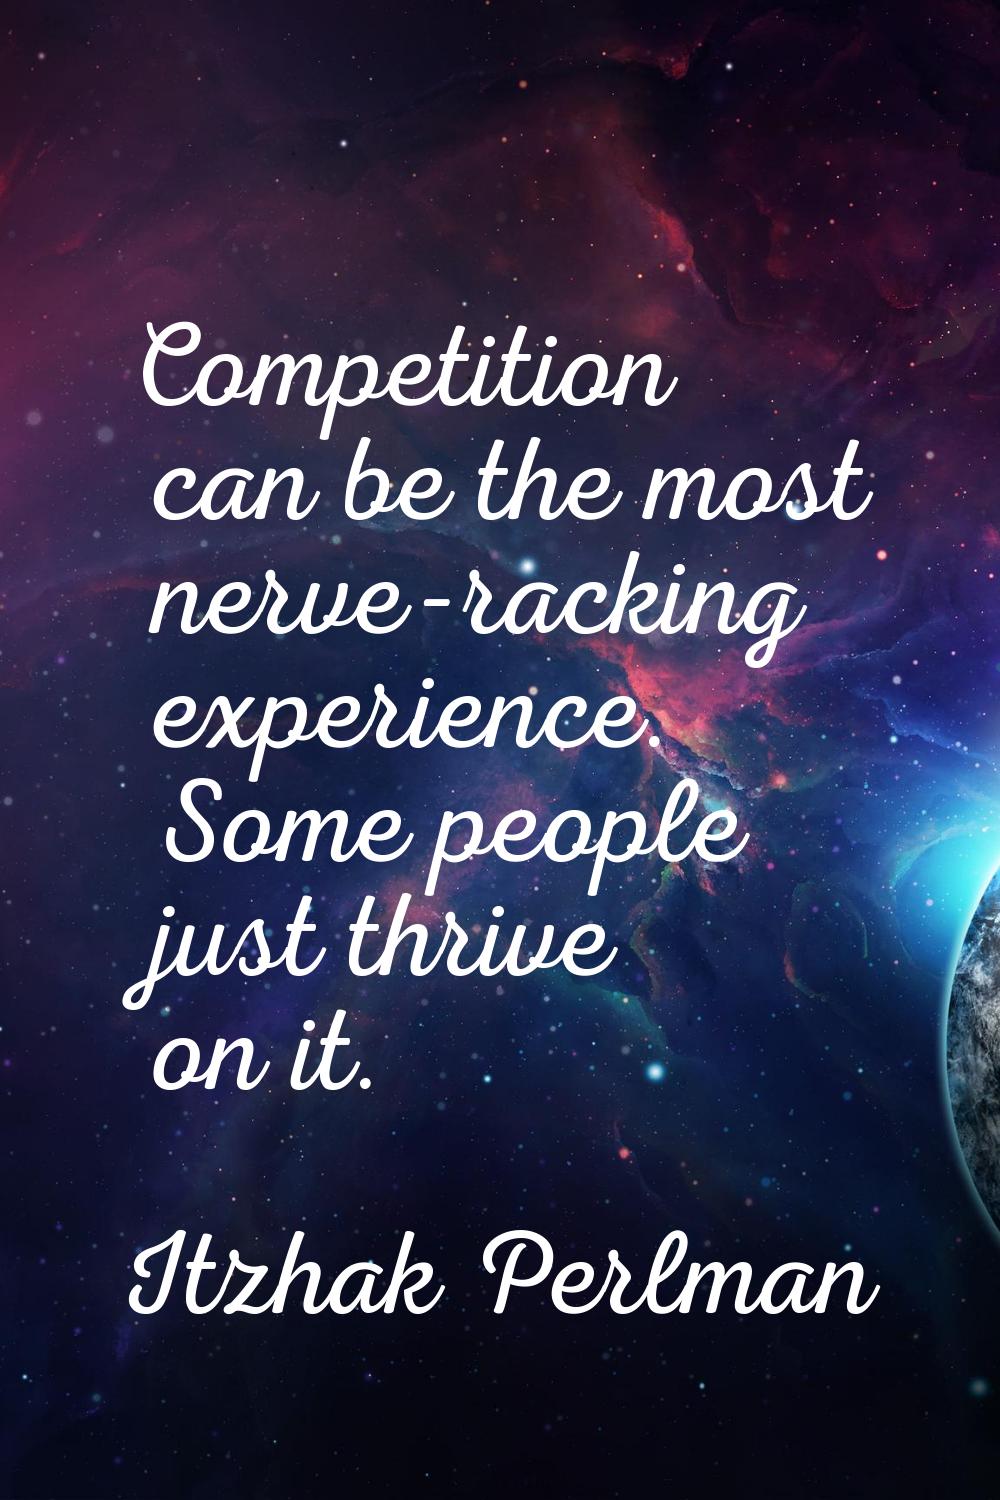 Competition can be the most nerve-racking experience. Some people just thrive on it.